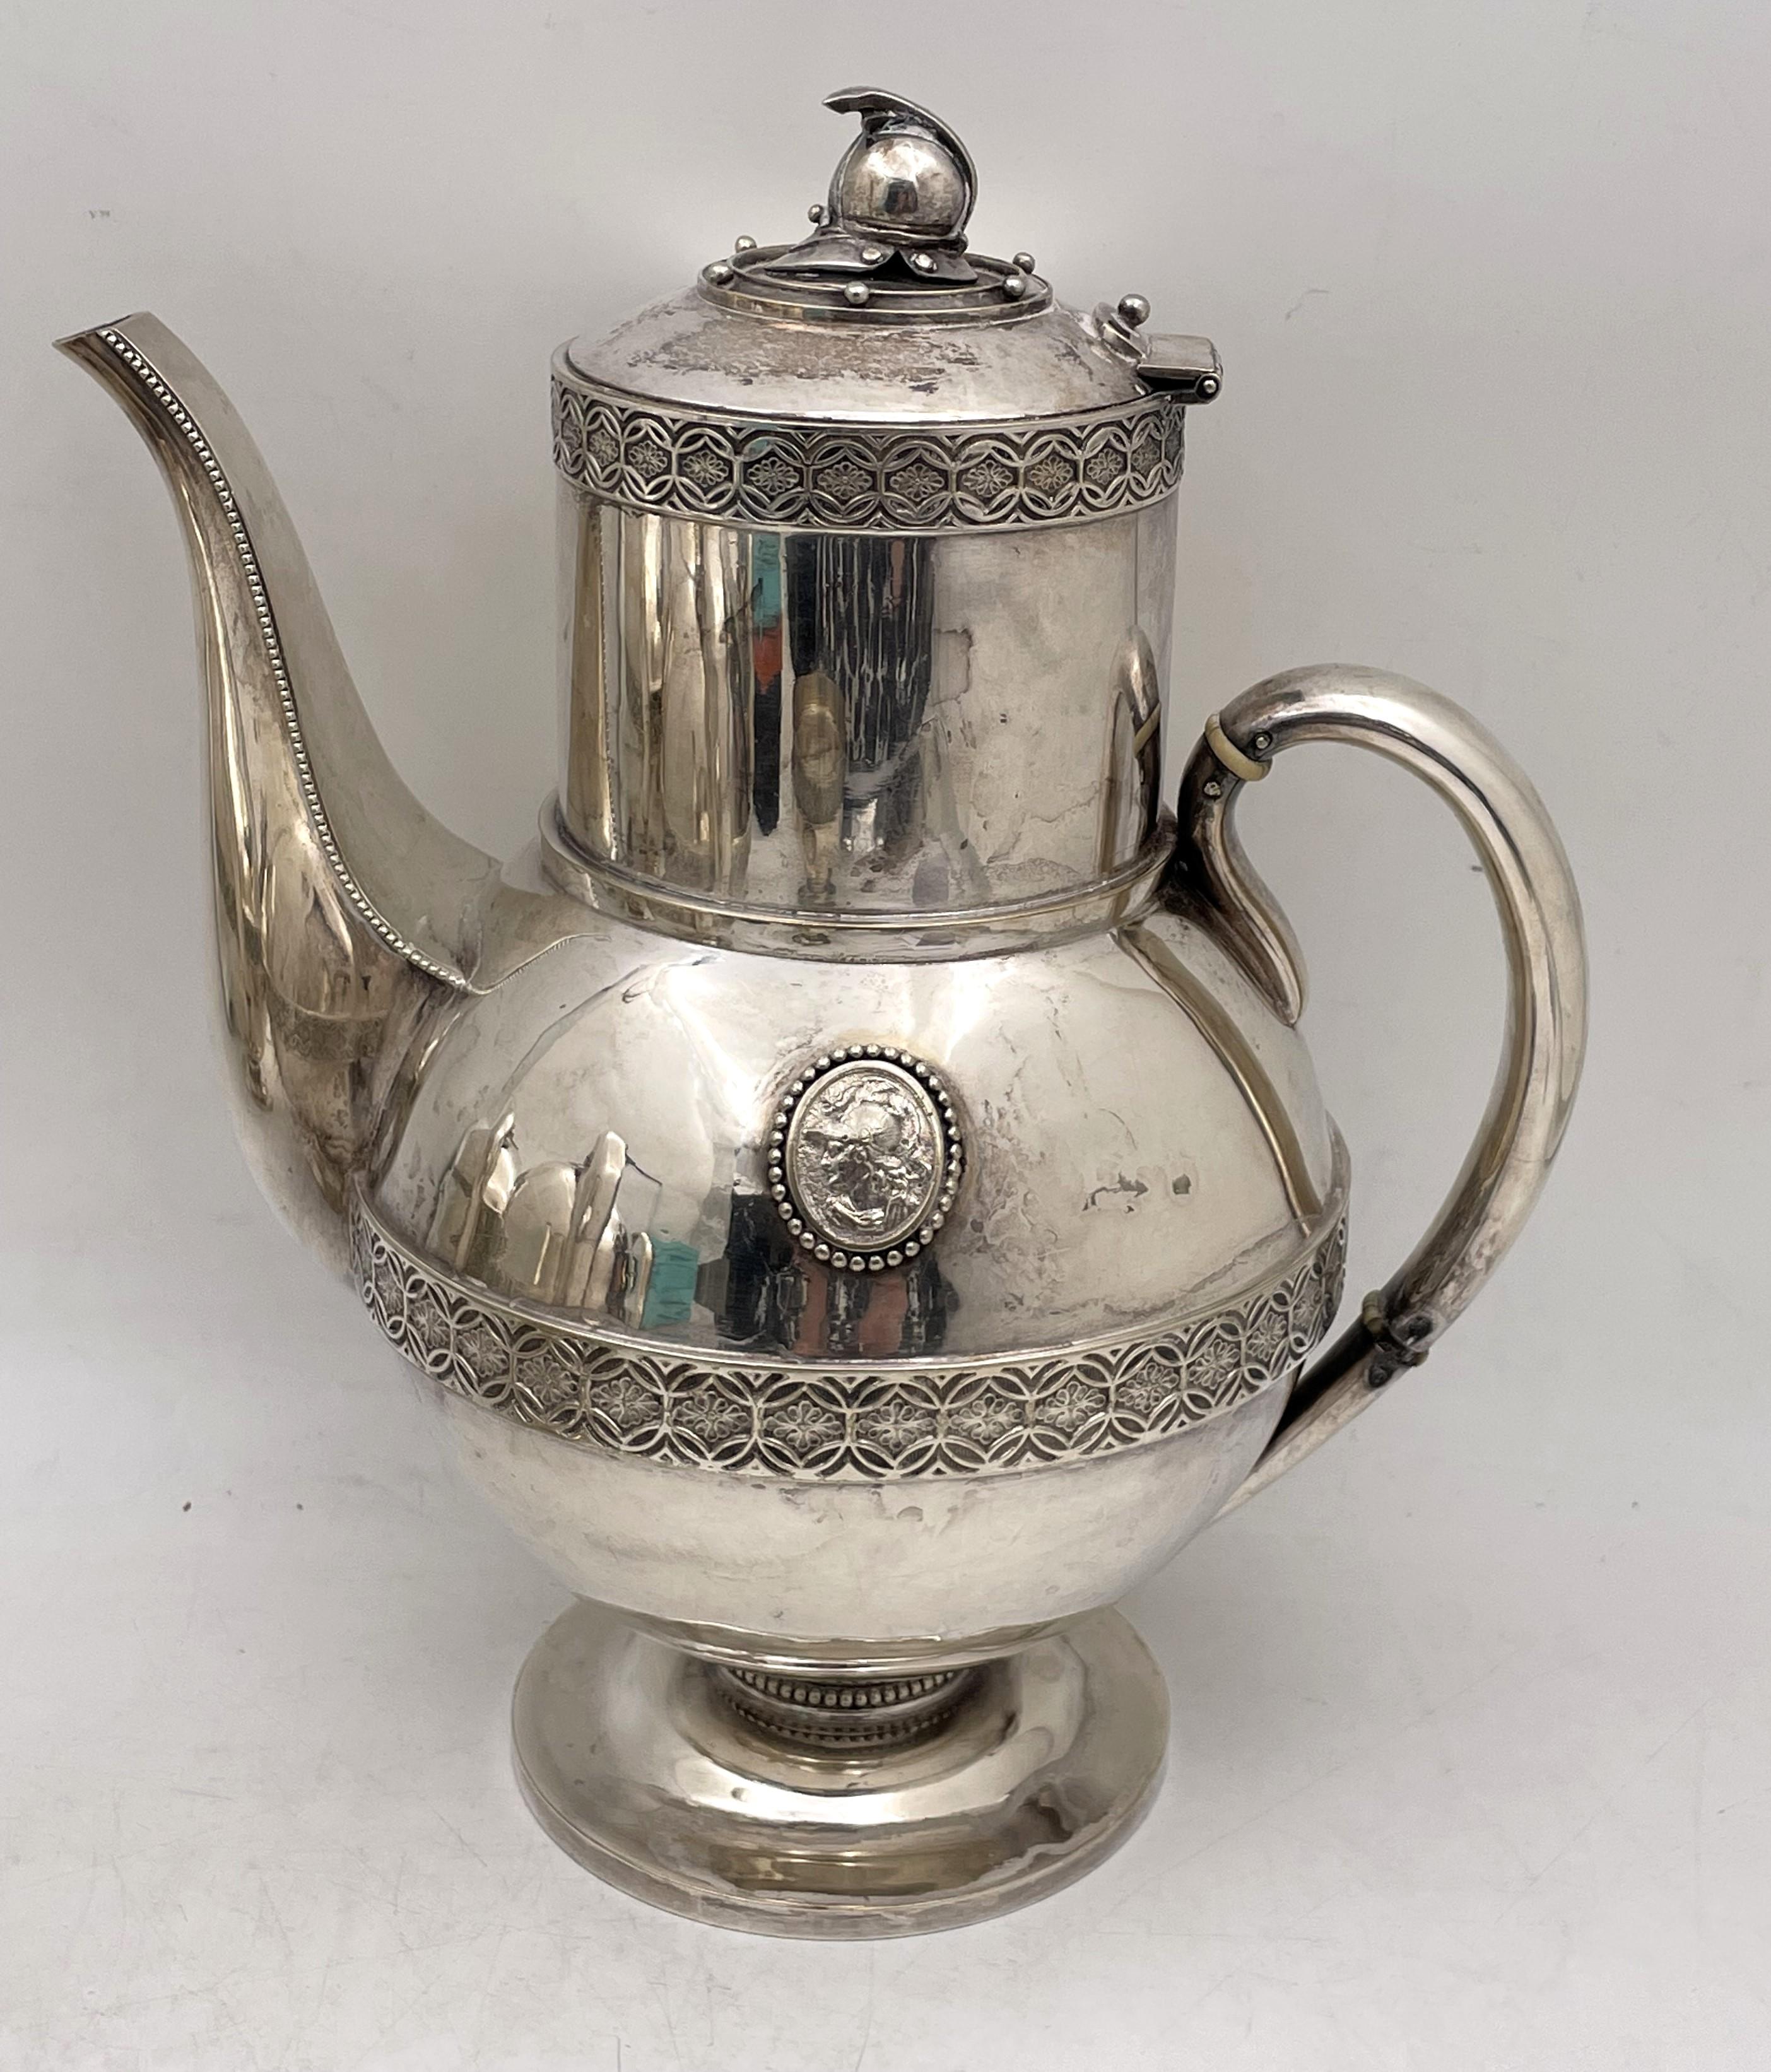 E. V. Haughwout & Co. silver soldered, mid-19th century 5-piece tea and coffee set in the Helmet Medallion pattern, consisting of:

- a coffee pot measuring 11 1/2